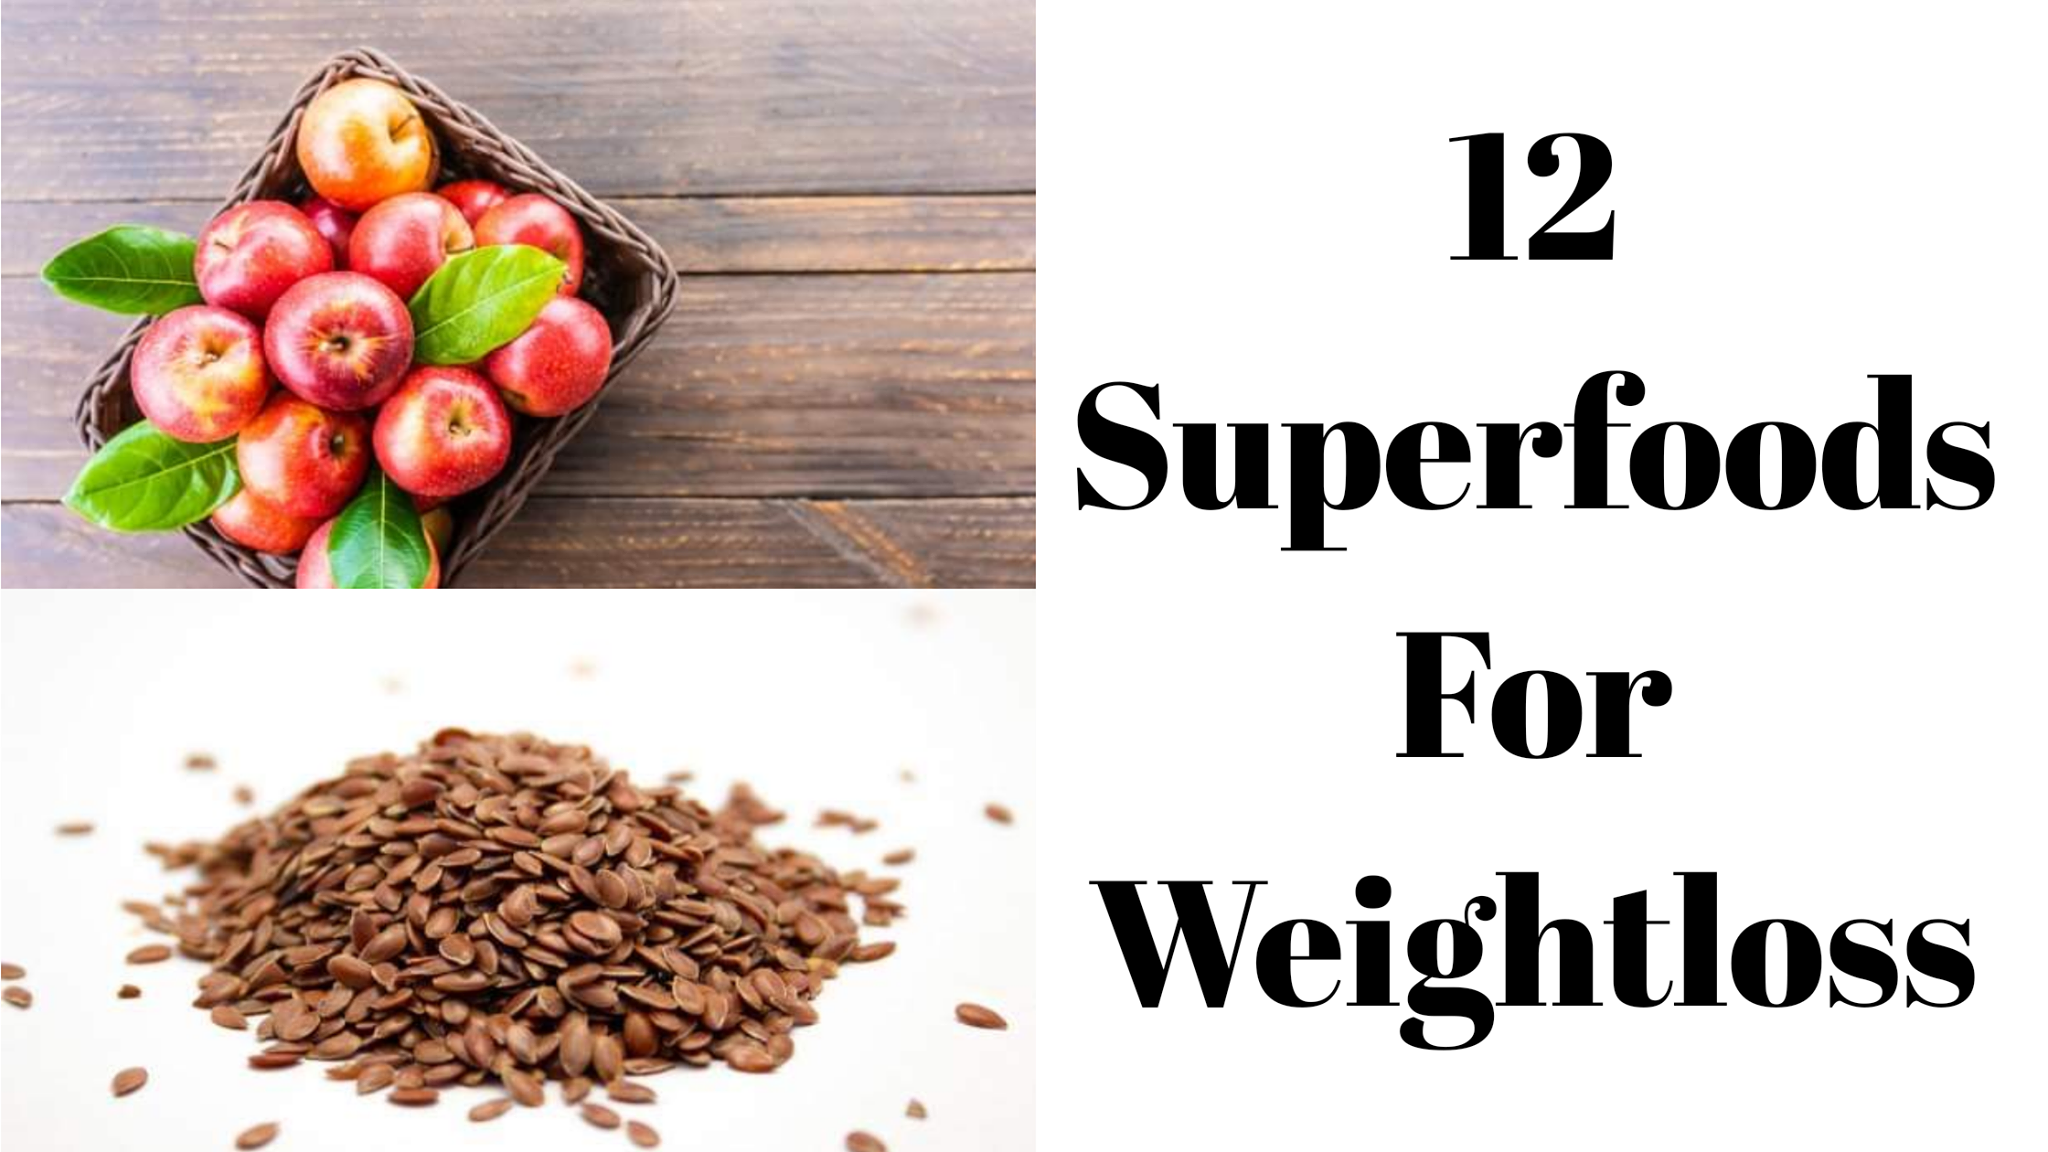 Superfoods for Weight Loss